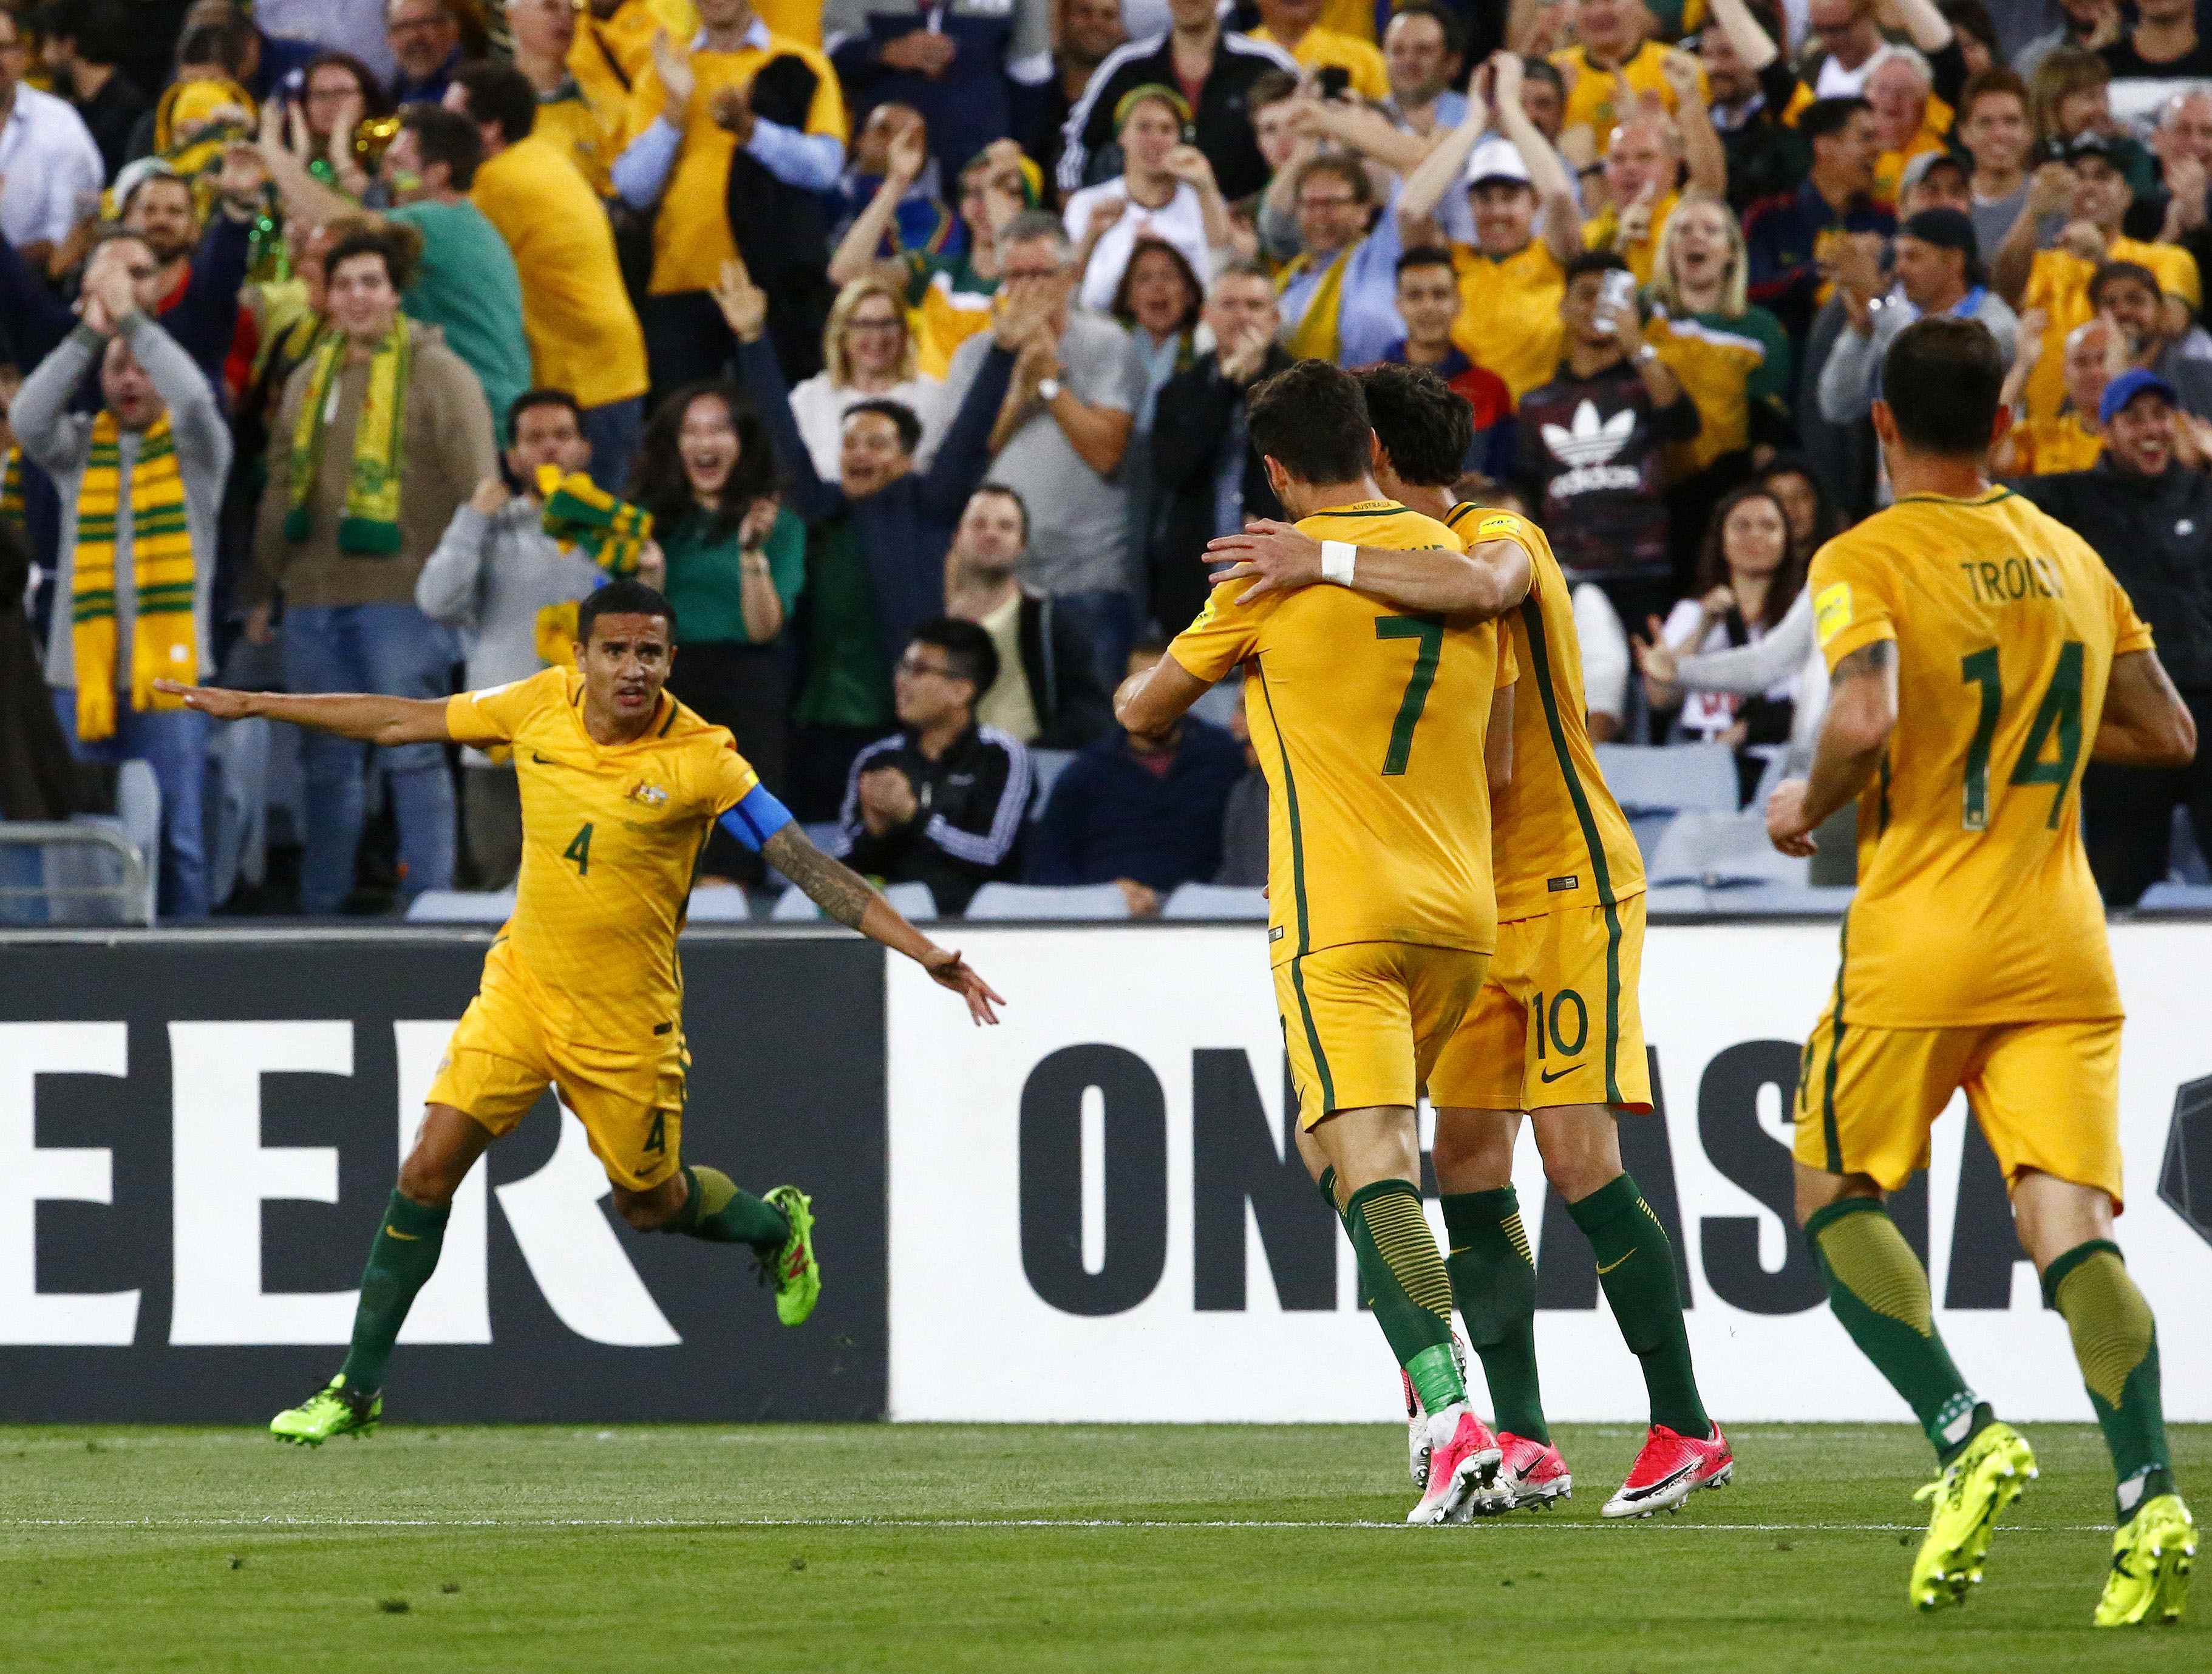 Football: Cahill scores extra-time winner against Syria to keep Australia's World Cup hopes alive